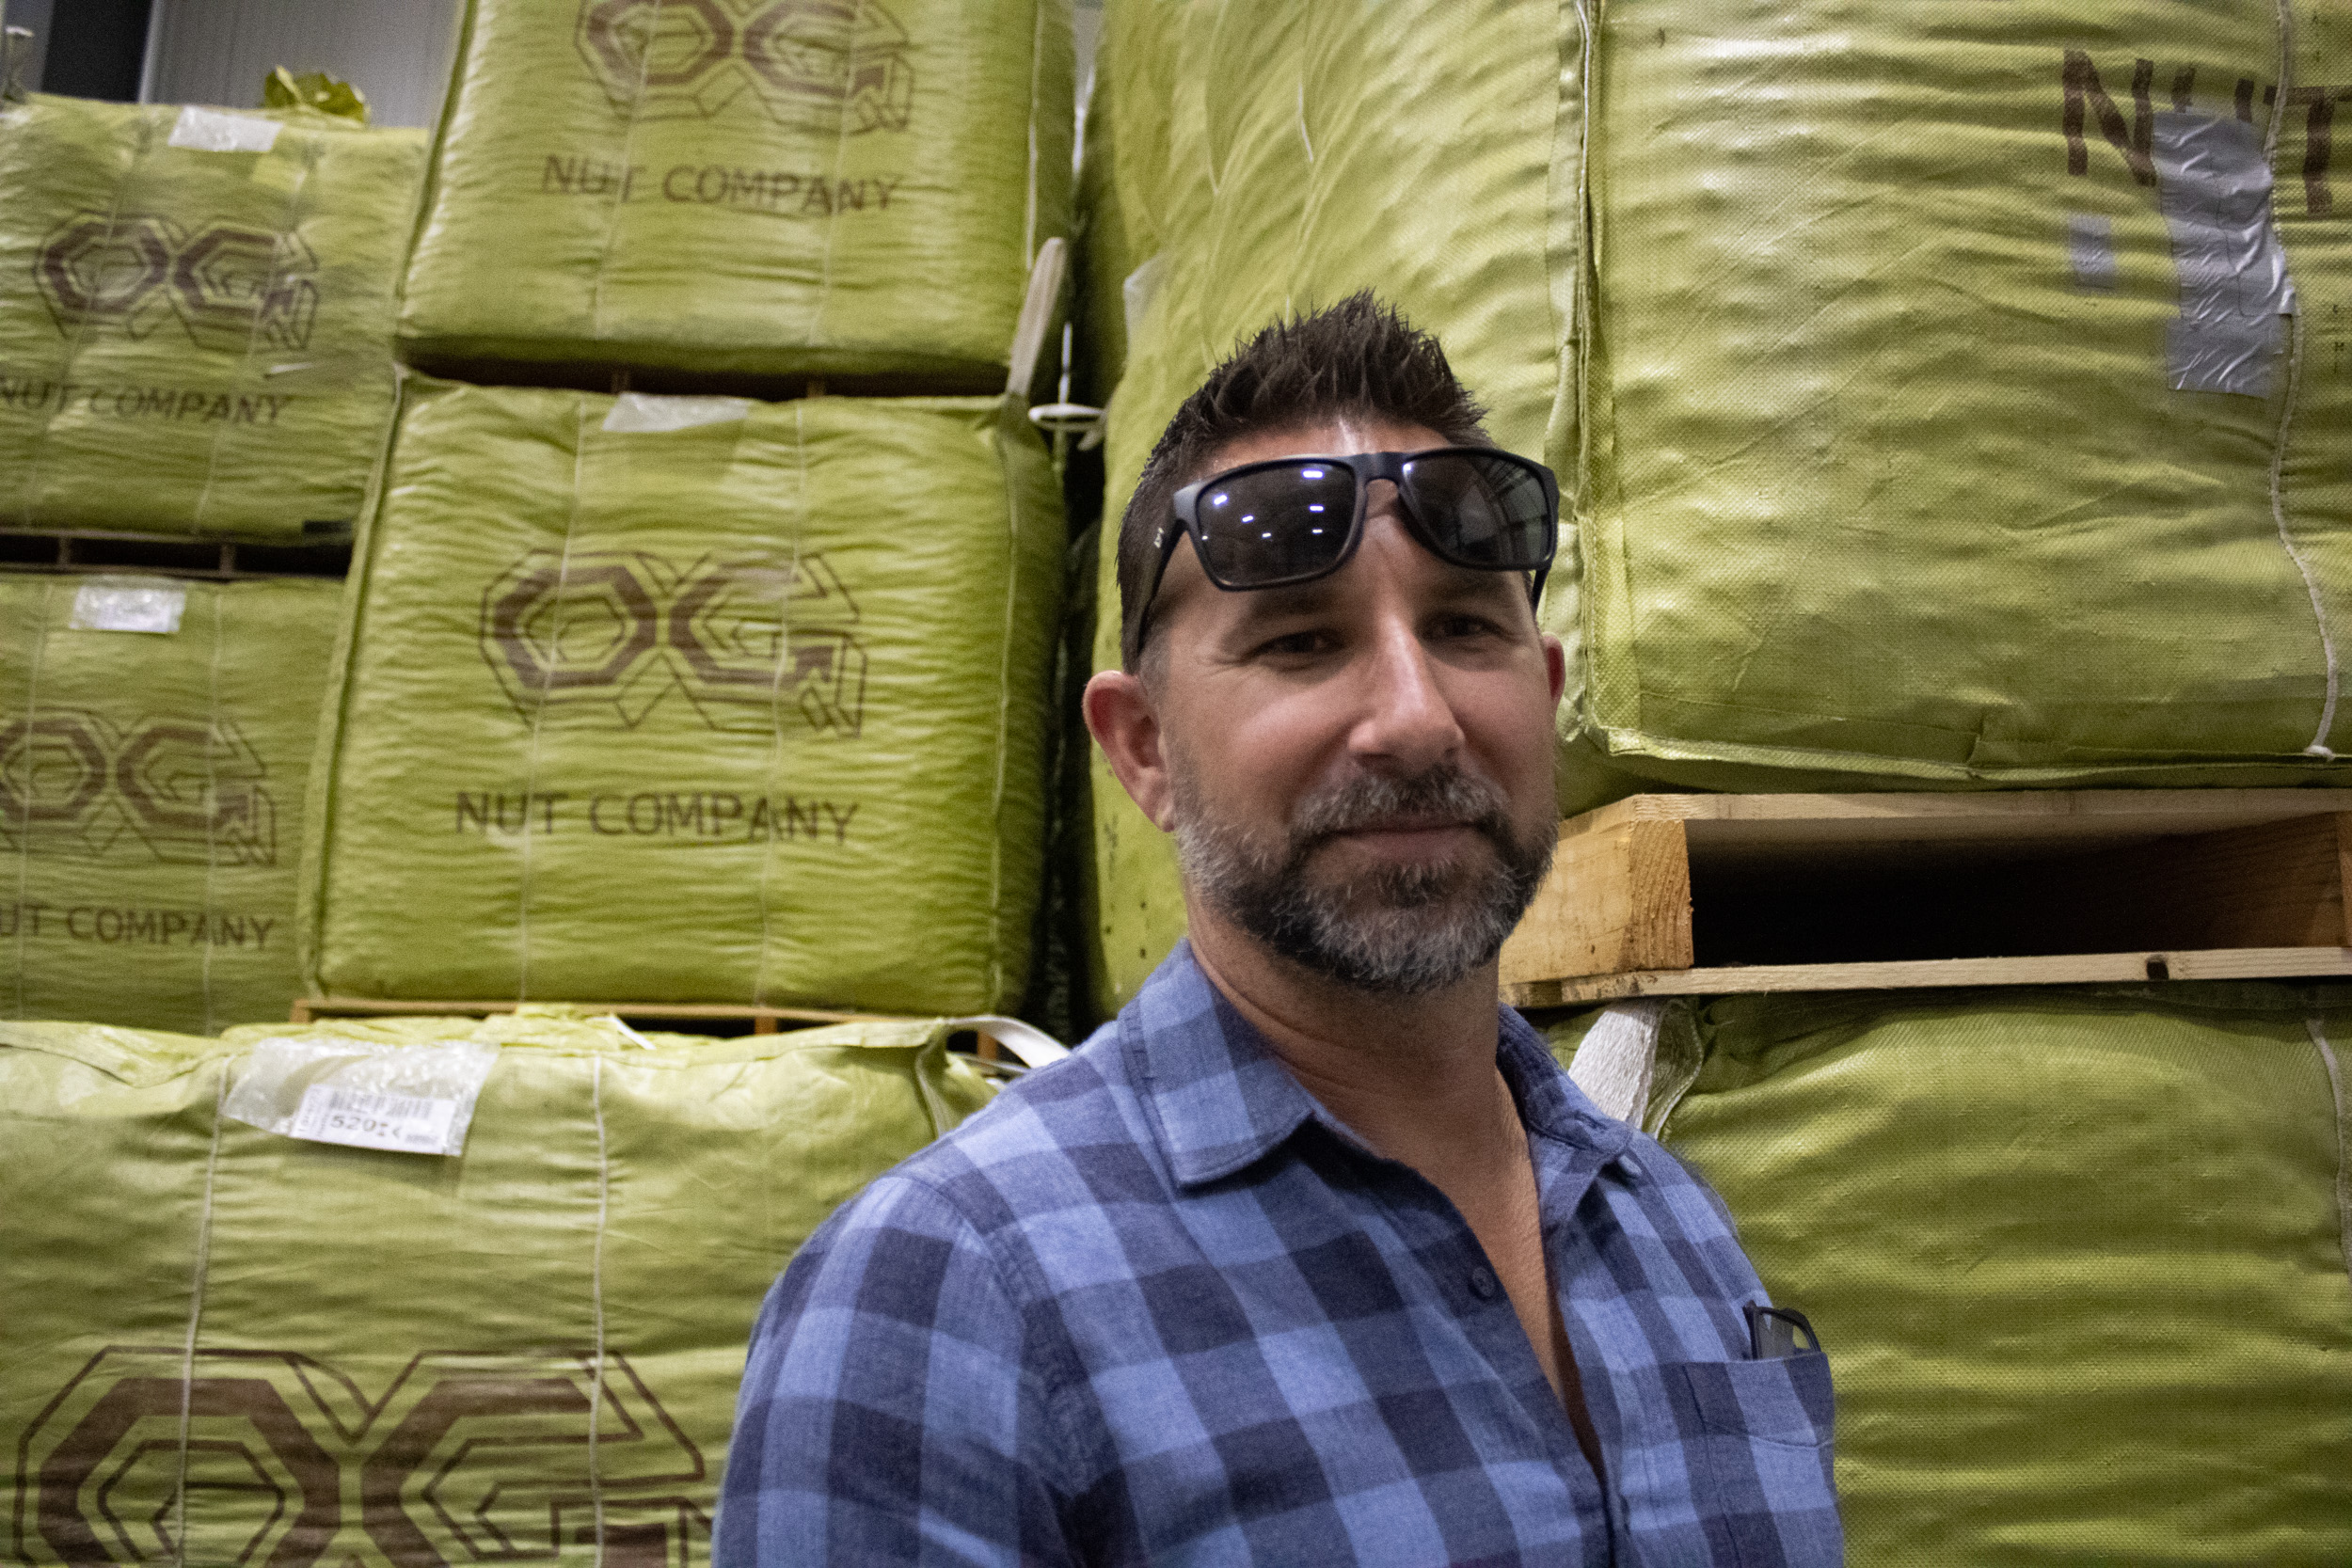 A white man, in a blue flannel shirt, with sunglasses covering his forehead stands in front of three stacks of cubed yellow bags, marked with “OG Nut Company” logos. A single sack  is almost as tall as the man, with three bags are in each stack. 